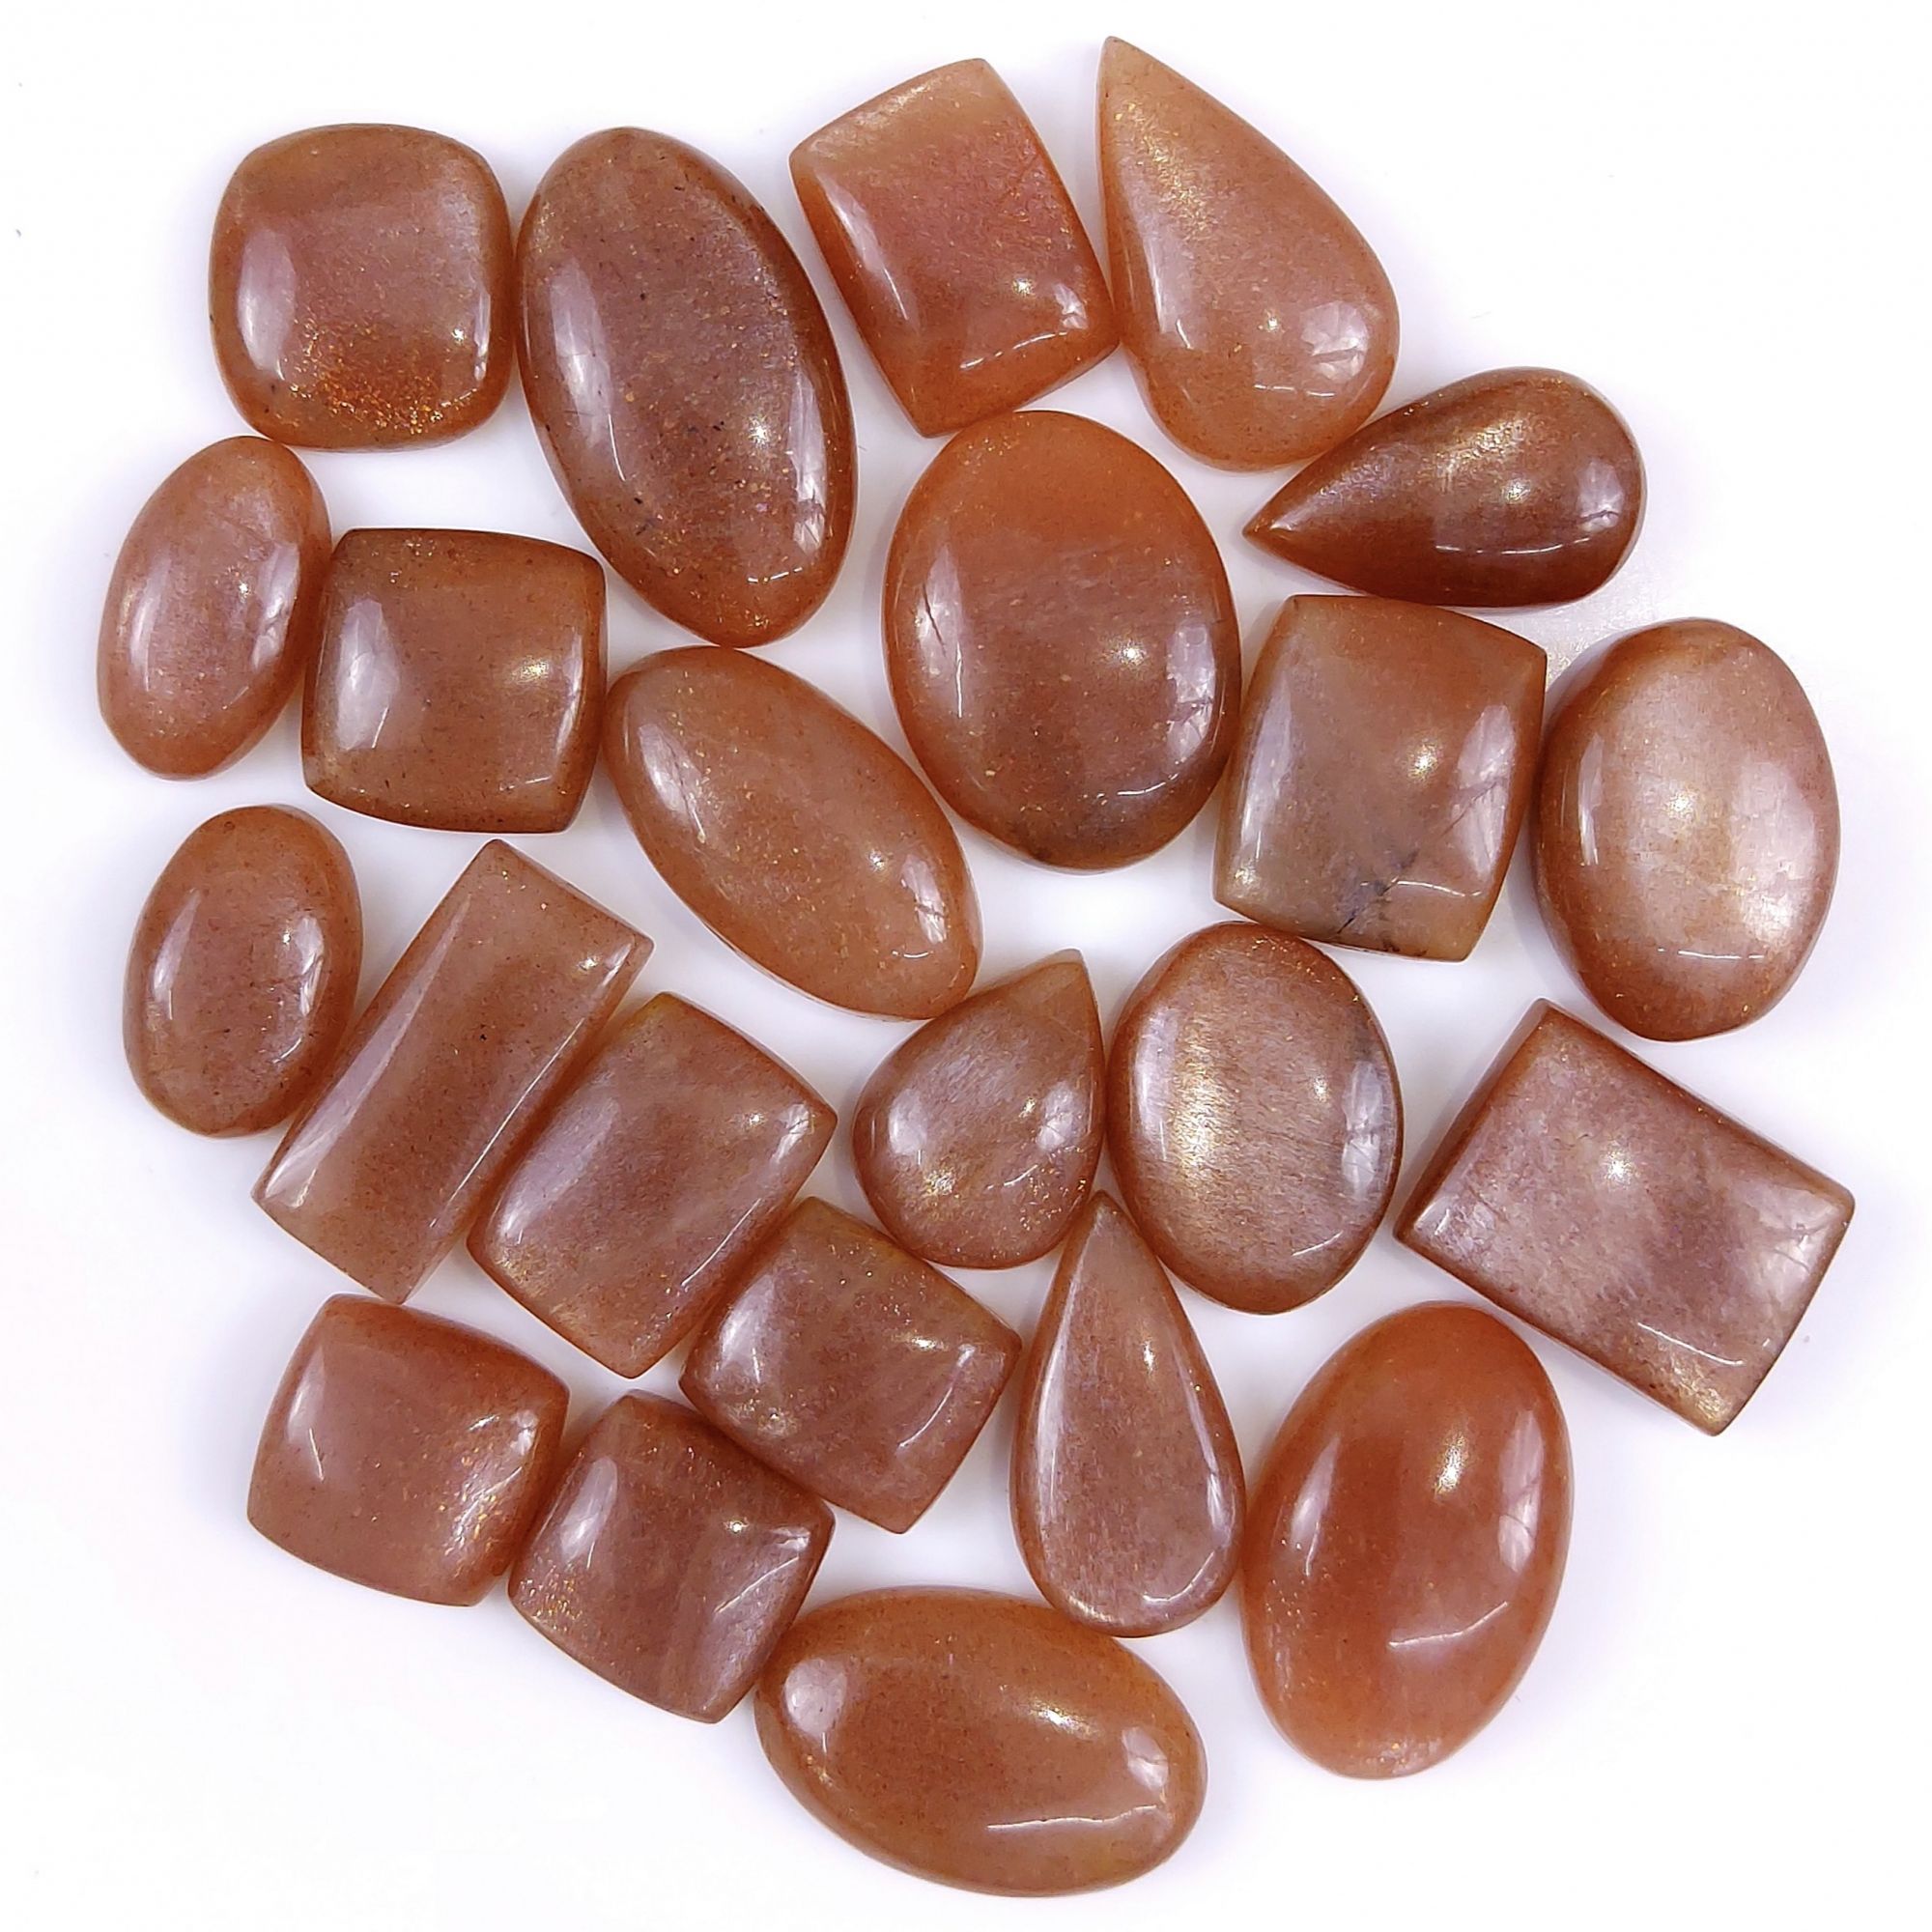 23Pcs 328Cts Natural Peach Moonstone Cabochon lot Gemstone Crystal Mix Shape Loose Gemstone beads for jewelry Making 28x18 15x15mm#7531